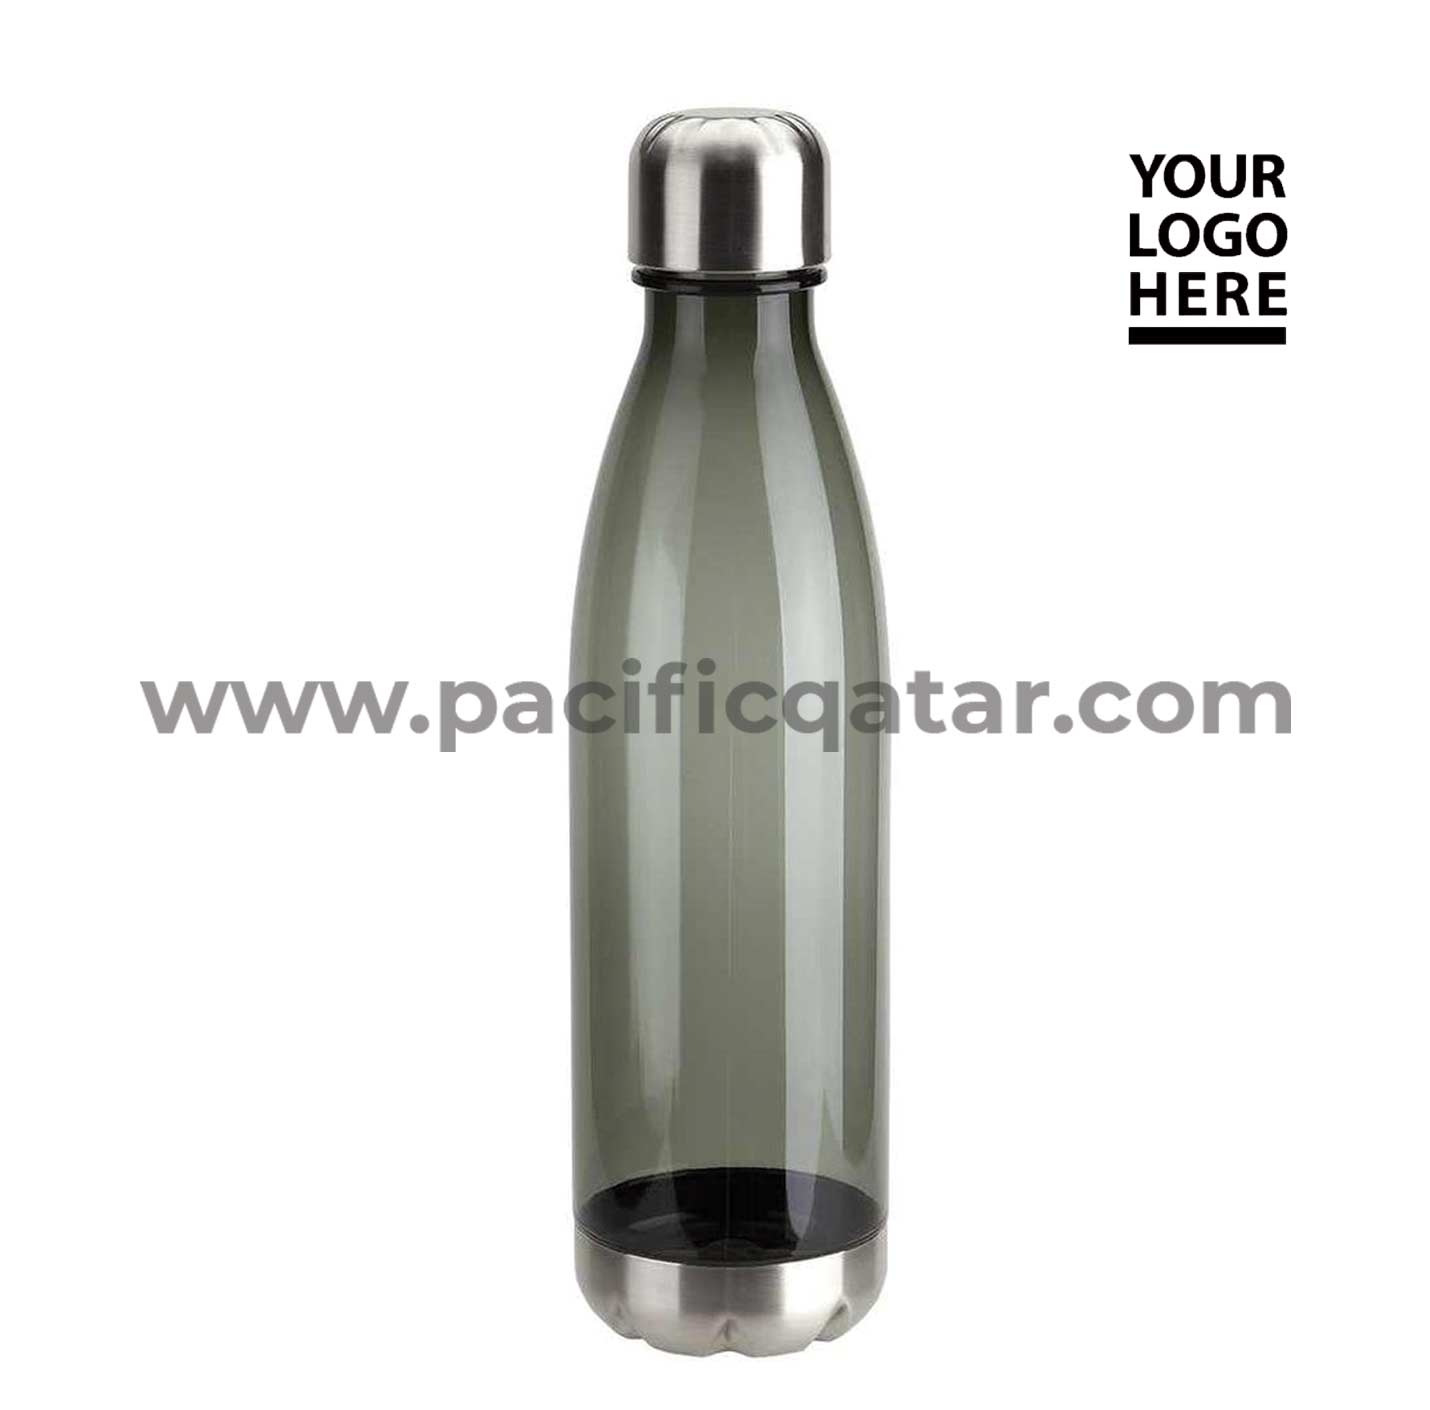 PLASTIC WATER BOTTLES WITH STAINLESS BASE AND CAP